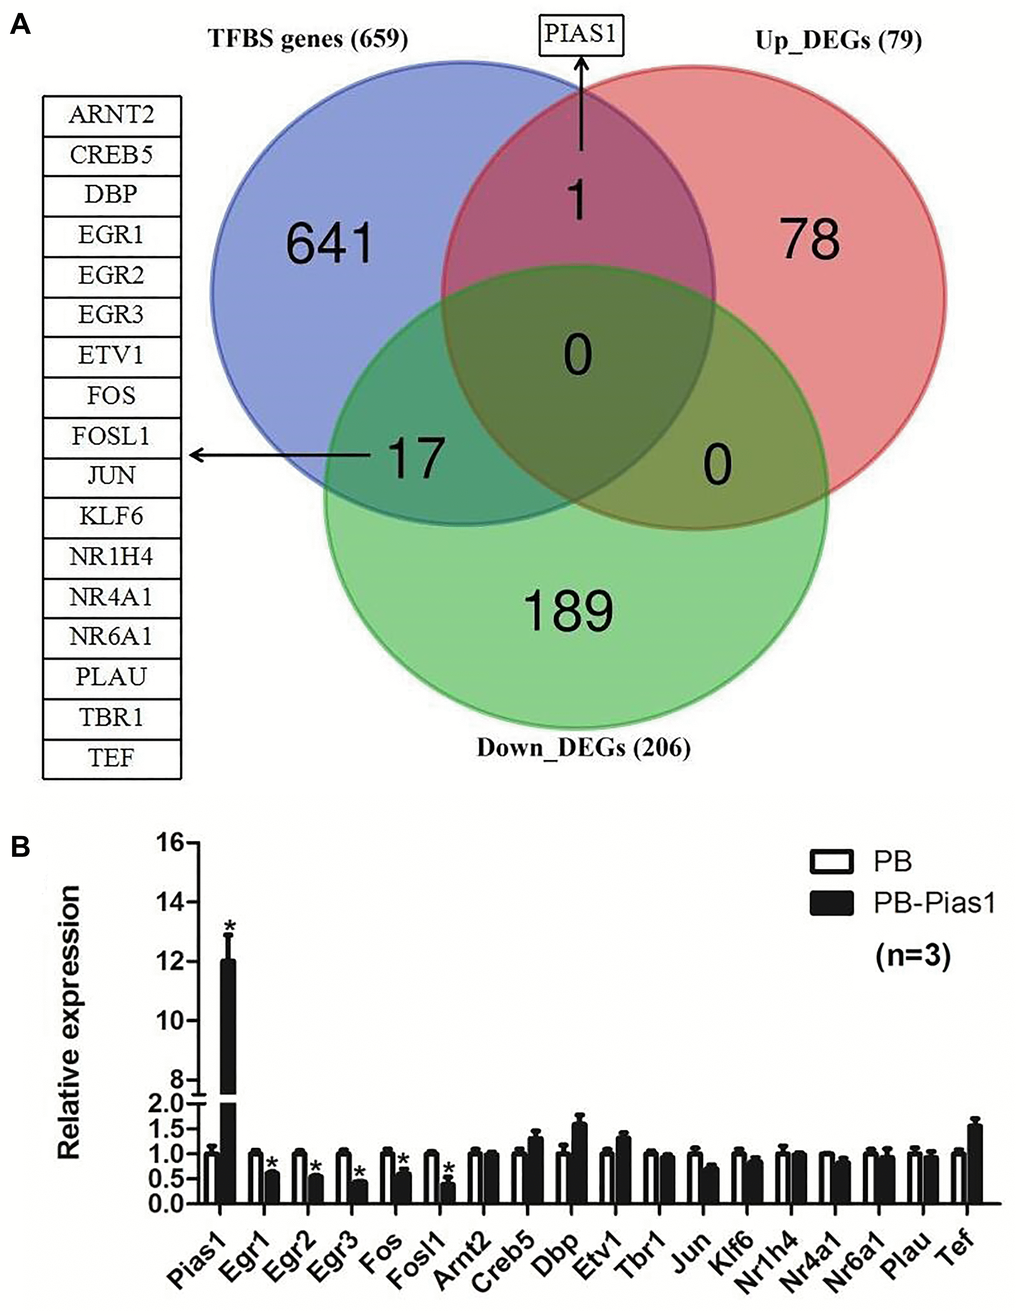 Overlapping targets between transcription factor binding site genes of STAT1 and DEGs of PIAS1. (A) Transcription factor binding site (TFBS) prediction for STAT1 was performed and compared with the differentially expressed genes of RNA-seq results in PIAS1 overexpression cell lines. As a result, 18 overlapping genes, including one upregulated gene PIAS1 and 17 downregulated genes, were identified as the target genes. (B) The regulation of the overlapping genes was evaluated by qPCR. As a result, five genes, including early growth response 1 (Egr1), early growth response 2 (Egr2), early growth response 3 (Egr3), FBJ osteosarcoma oncogene (Fos) and fos-like antigen 1 (Fosl1), were significantly downregulated in PIAS1-overexpressing cells.